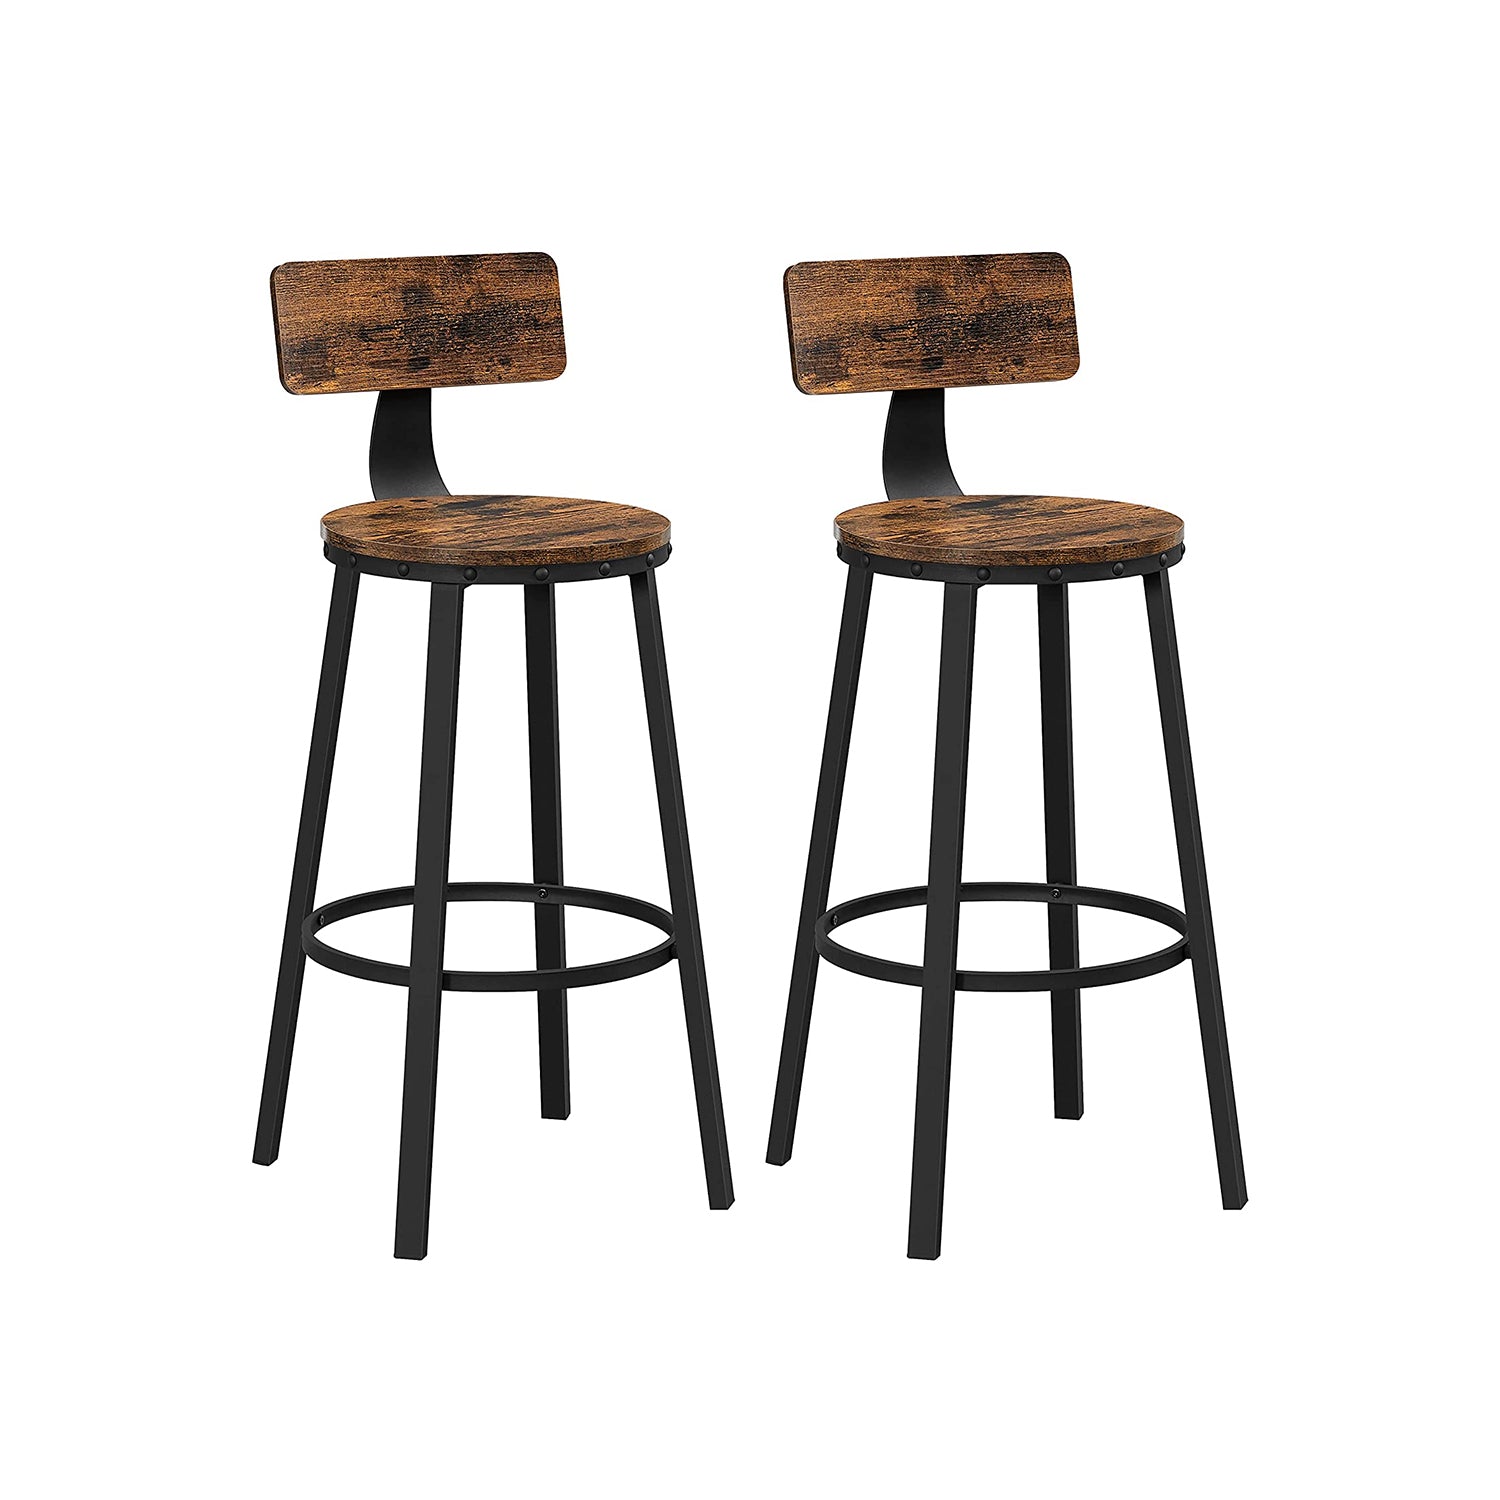 Set of 2 Bar Stools with Backrests, 76.2 cm Tall, Rustic Brown + Black / 2